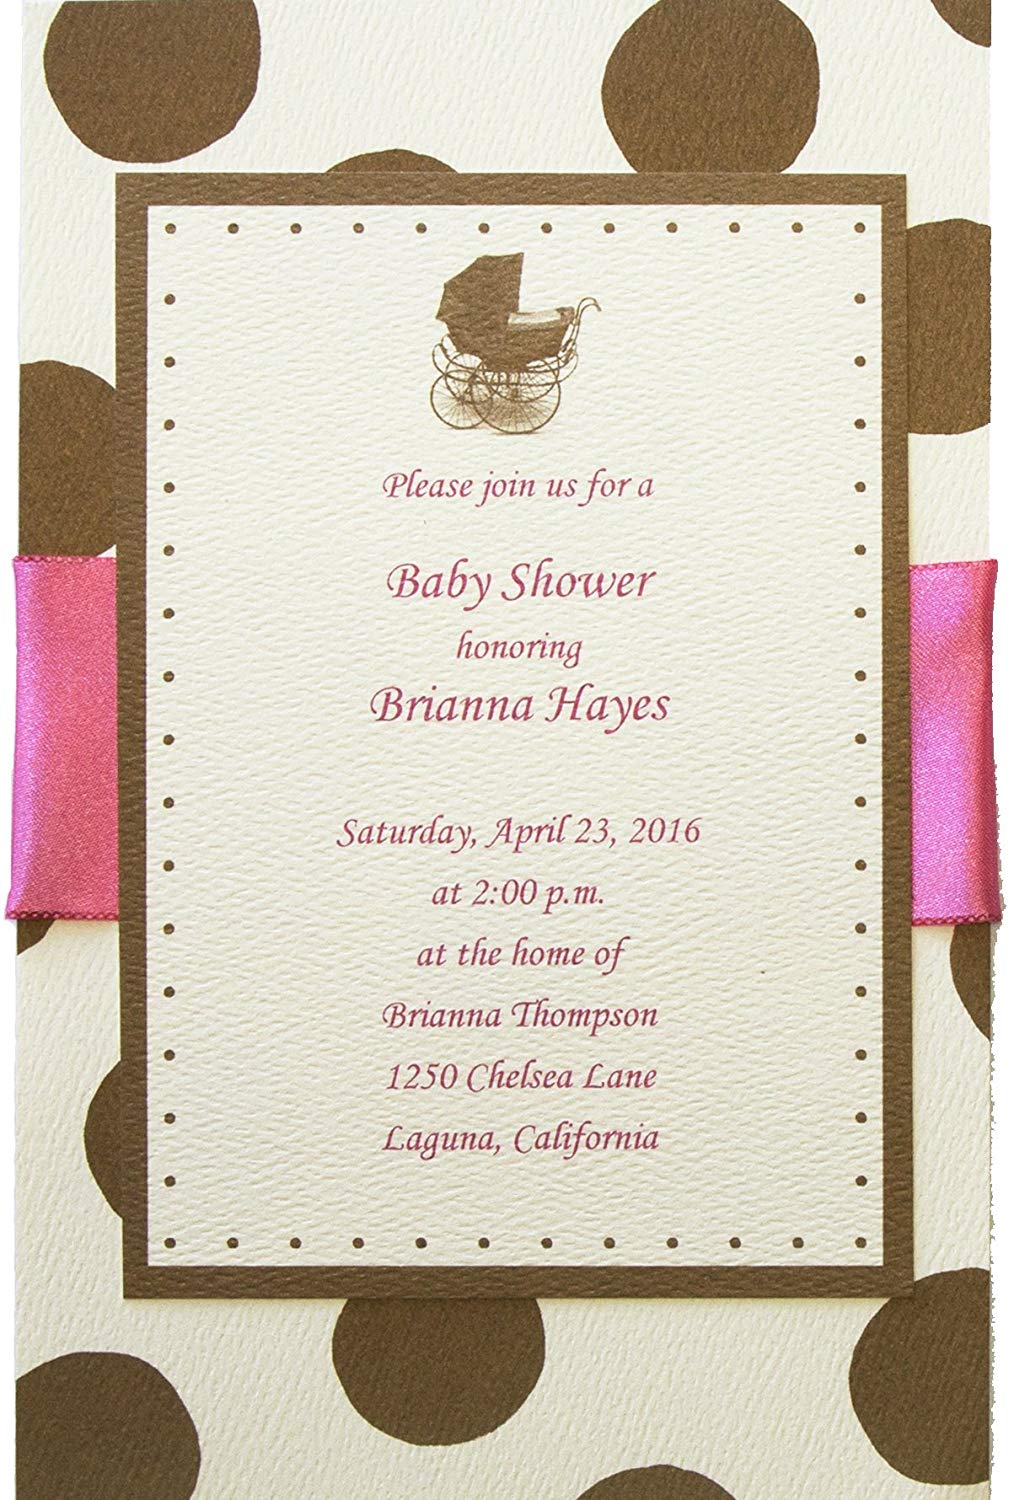 Full Size of Baby Shower:unique Baby Shower Themes Homemade Baby Shower Decorations Baby Shower Invitations Baby Girl Themes Nursery For Girls Baby Shower Ideas For Girls Baby Girl Themes For Baby Shower Pinterest Nursery Ideas